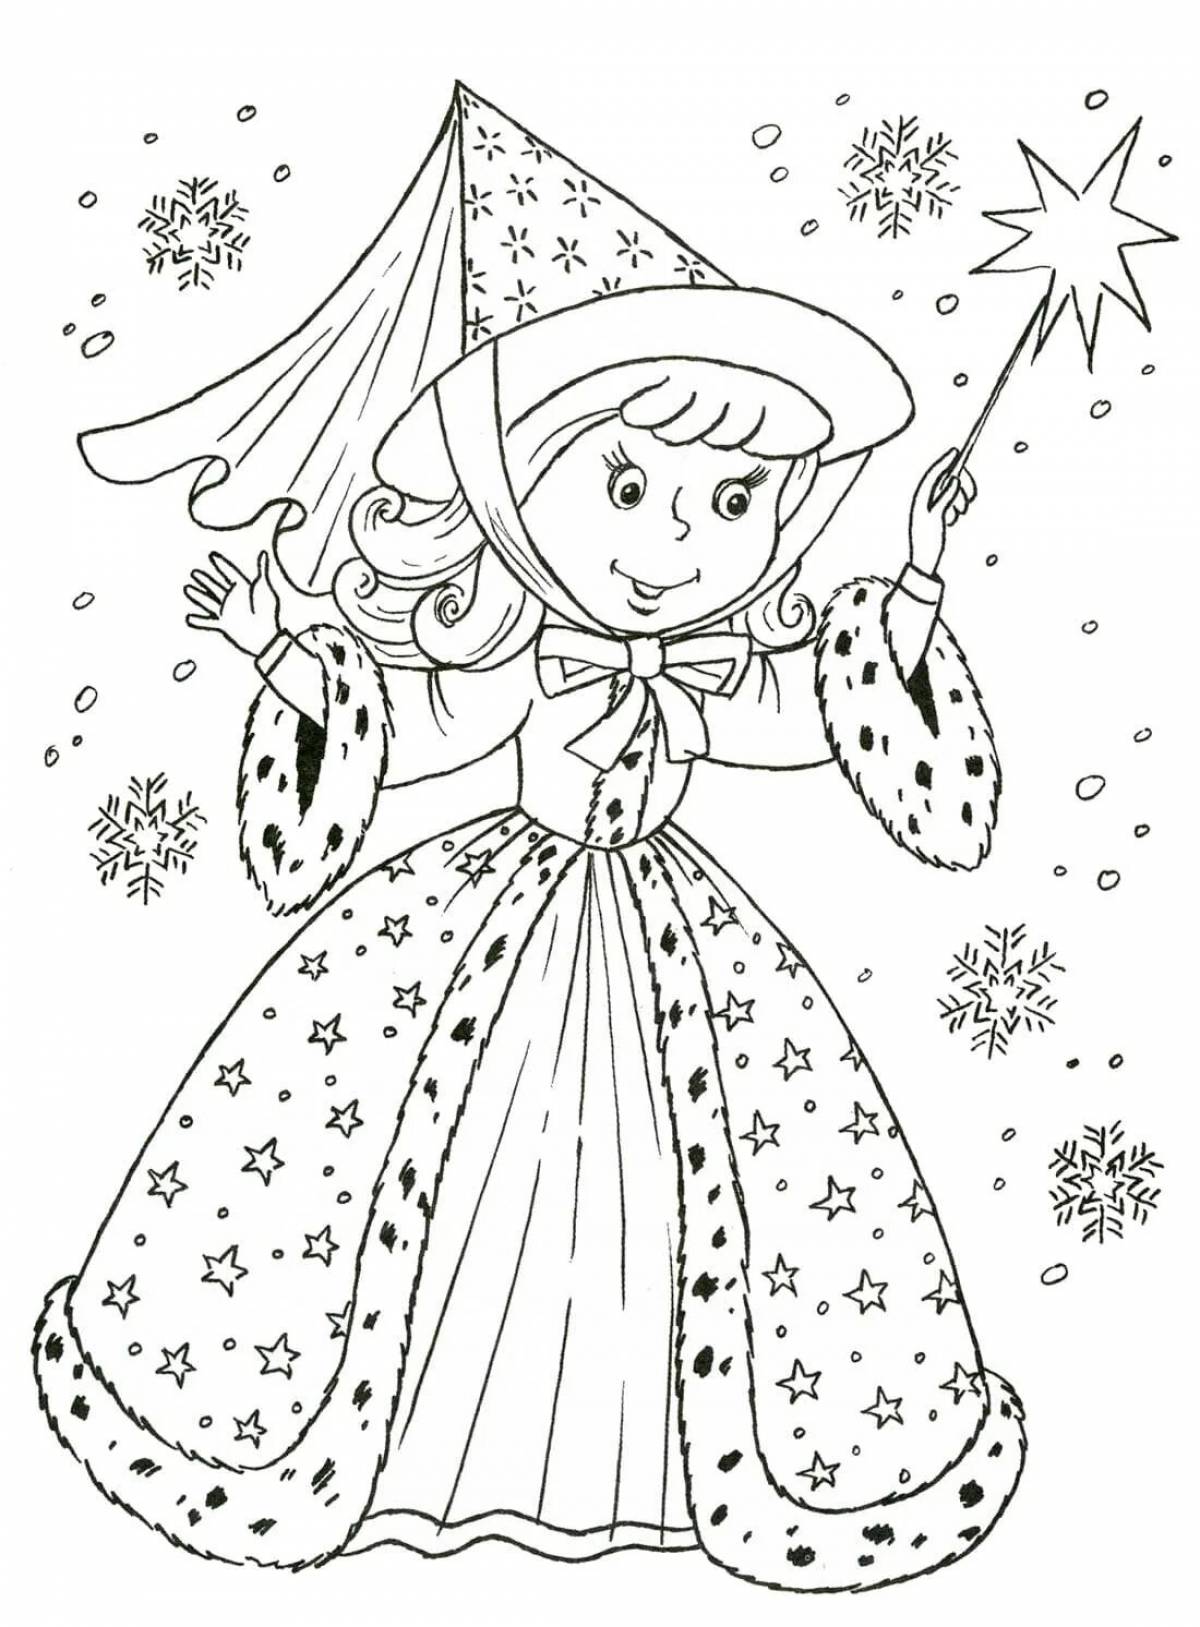 Peaceful fairy tale coloring pages